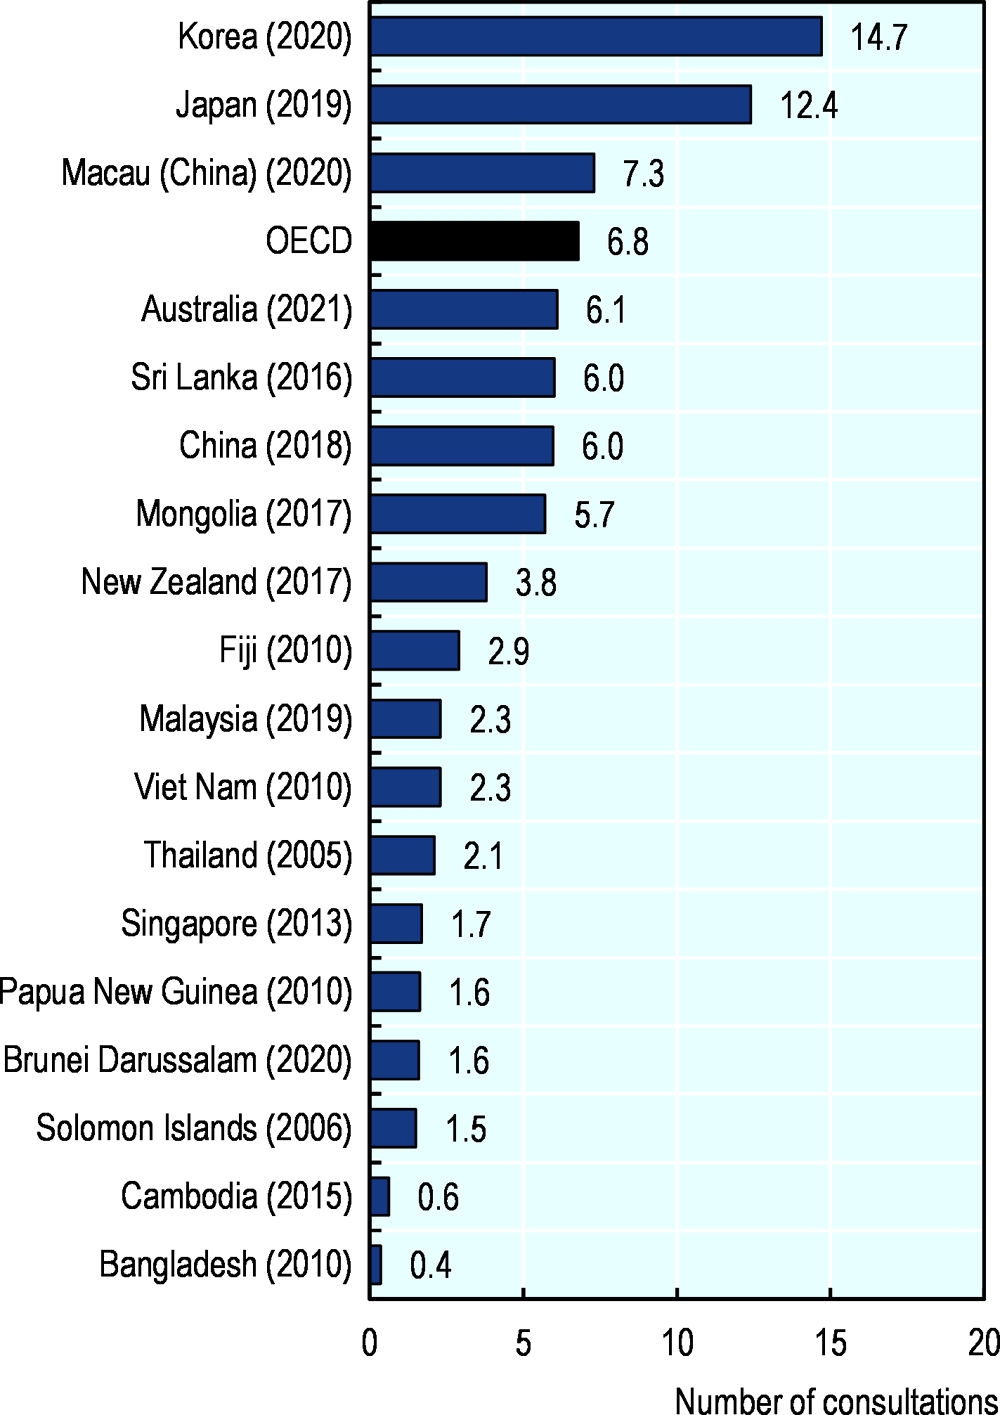 Figure 5.4. Doctor consultations per capita, latest year available